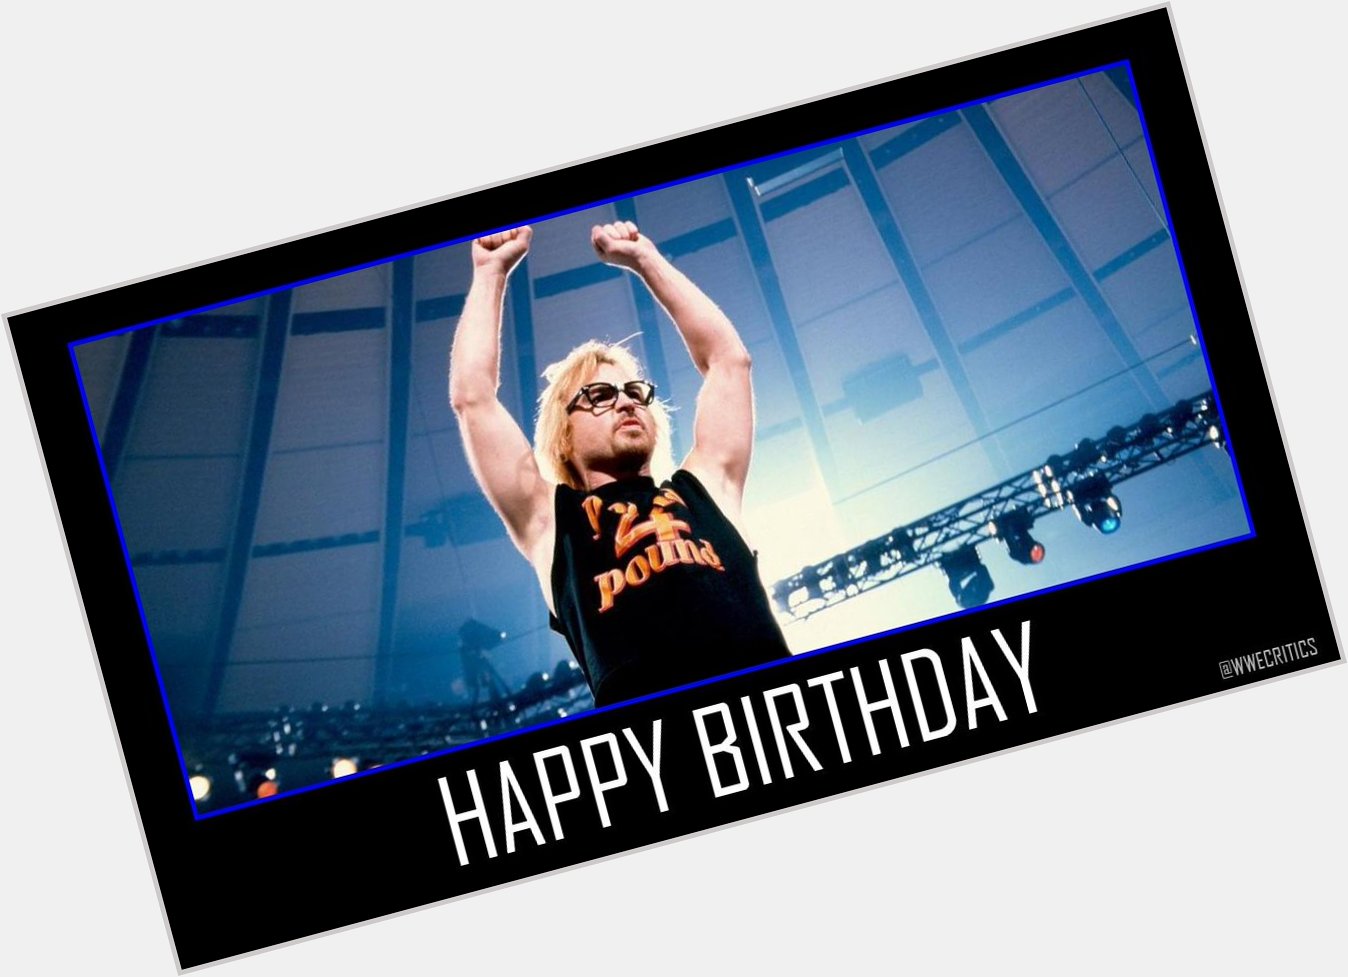 Happy 48th Birthday to former Superstar Spike Dudley.

What are your memories of his time in wrestling? 